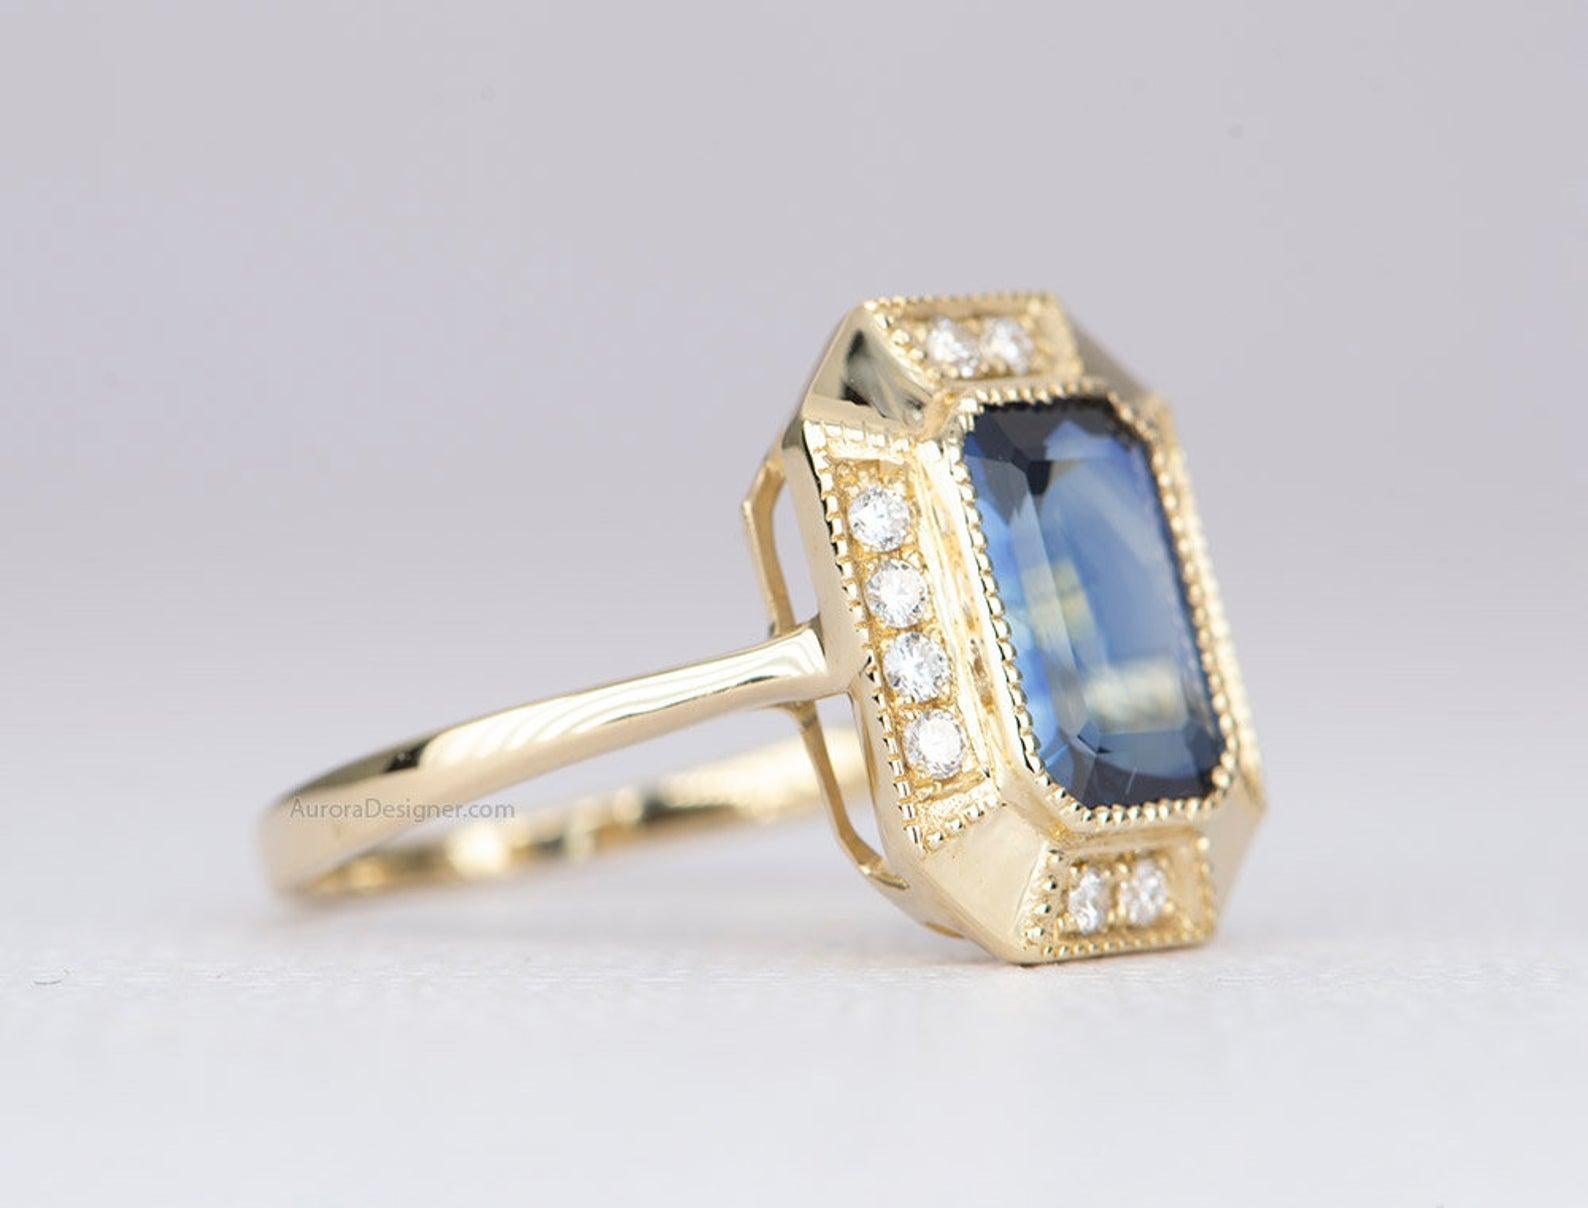 ♥  The center stone is a beautiful 2.25ct emerald-cut sapphire that exhibits a deep blue color with some yellow/green reflection from within.
♥  We bezel set the stone with milgrain edges for an Art Deco-inspired design, then added white full cut